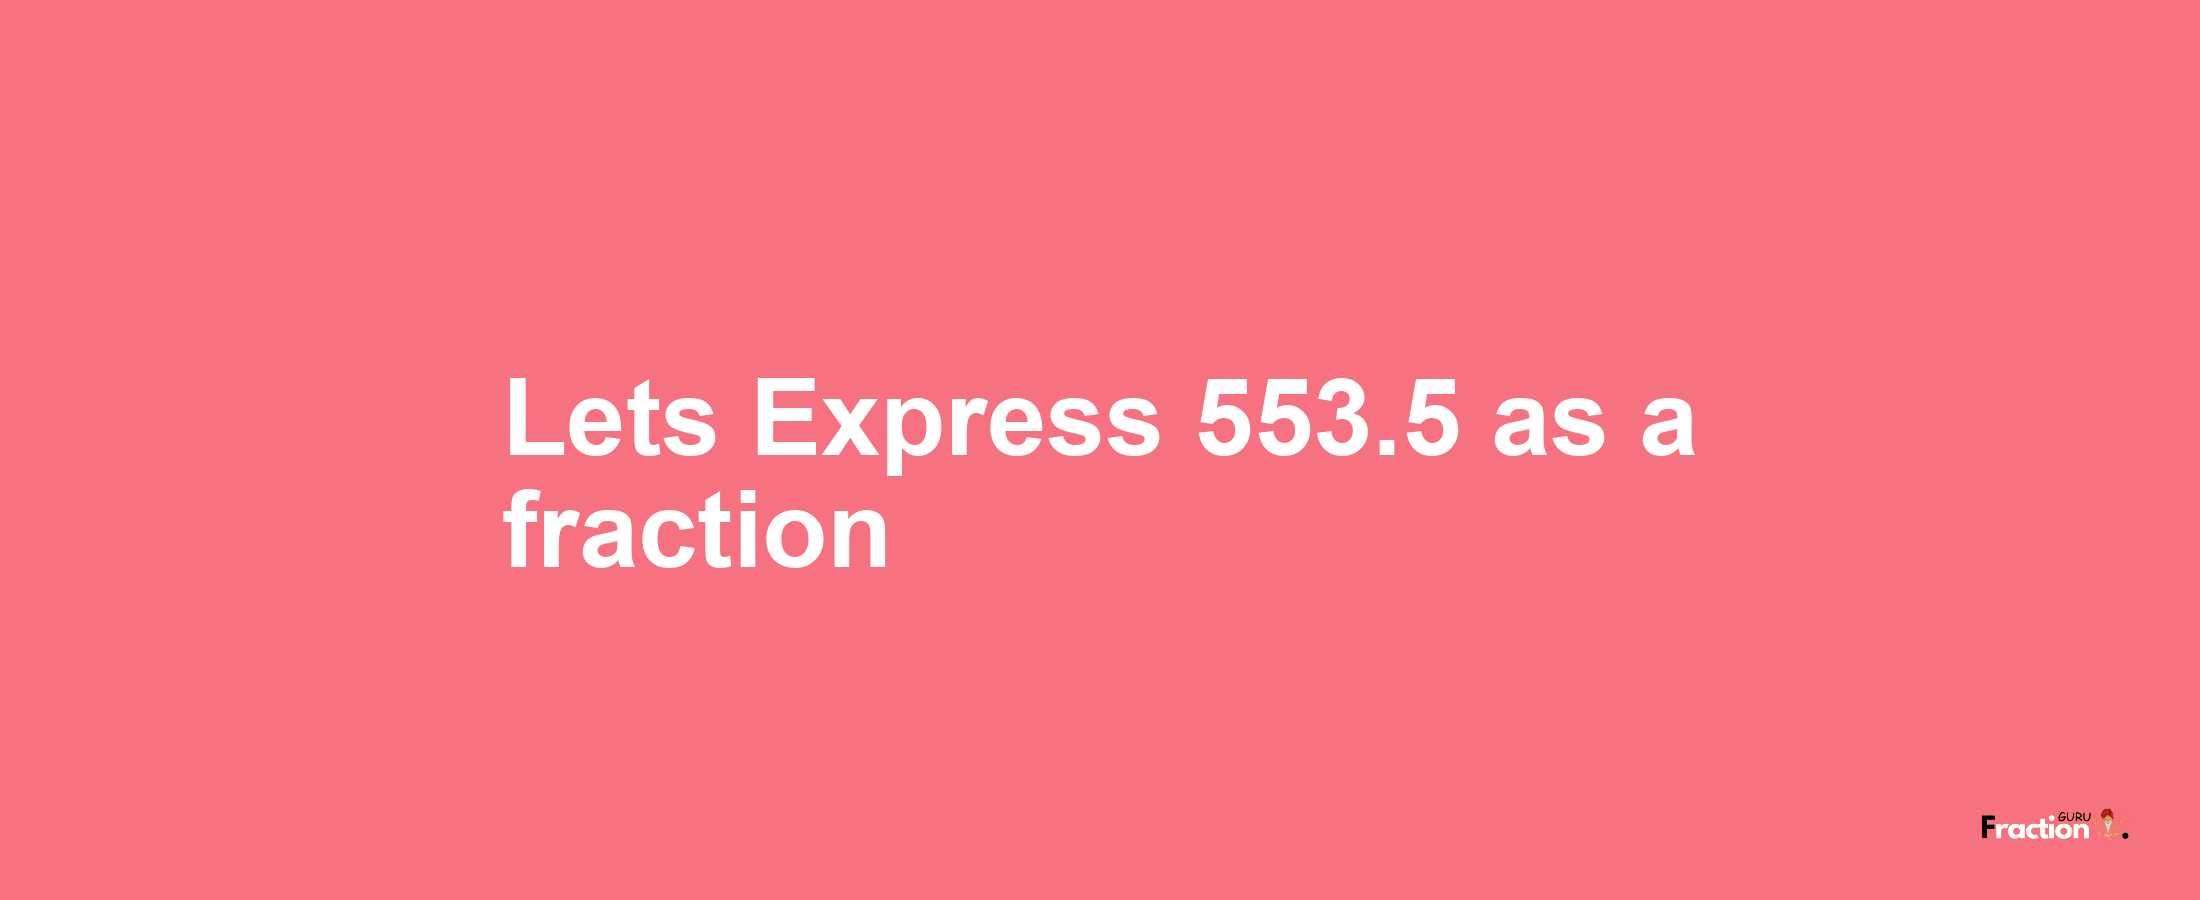 Lets Express 553.5 as afraction